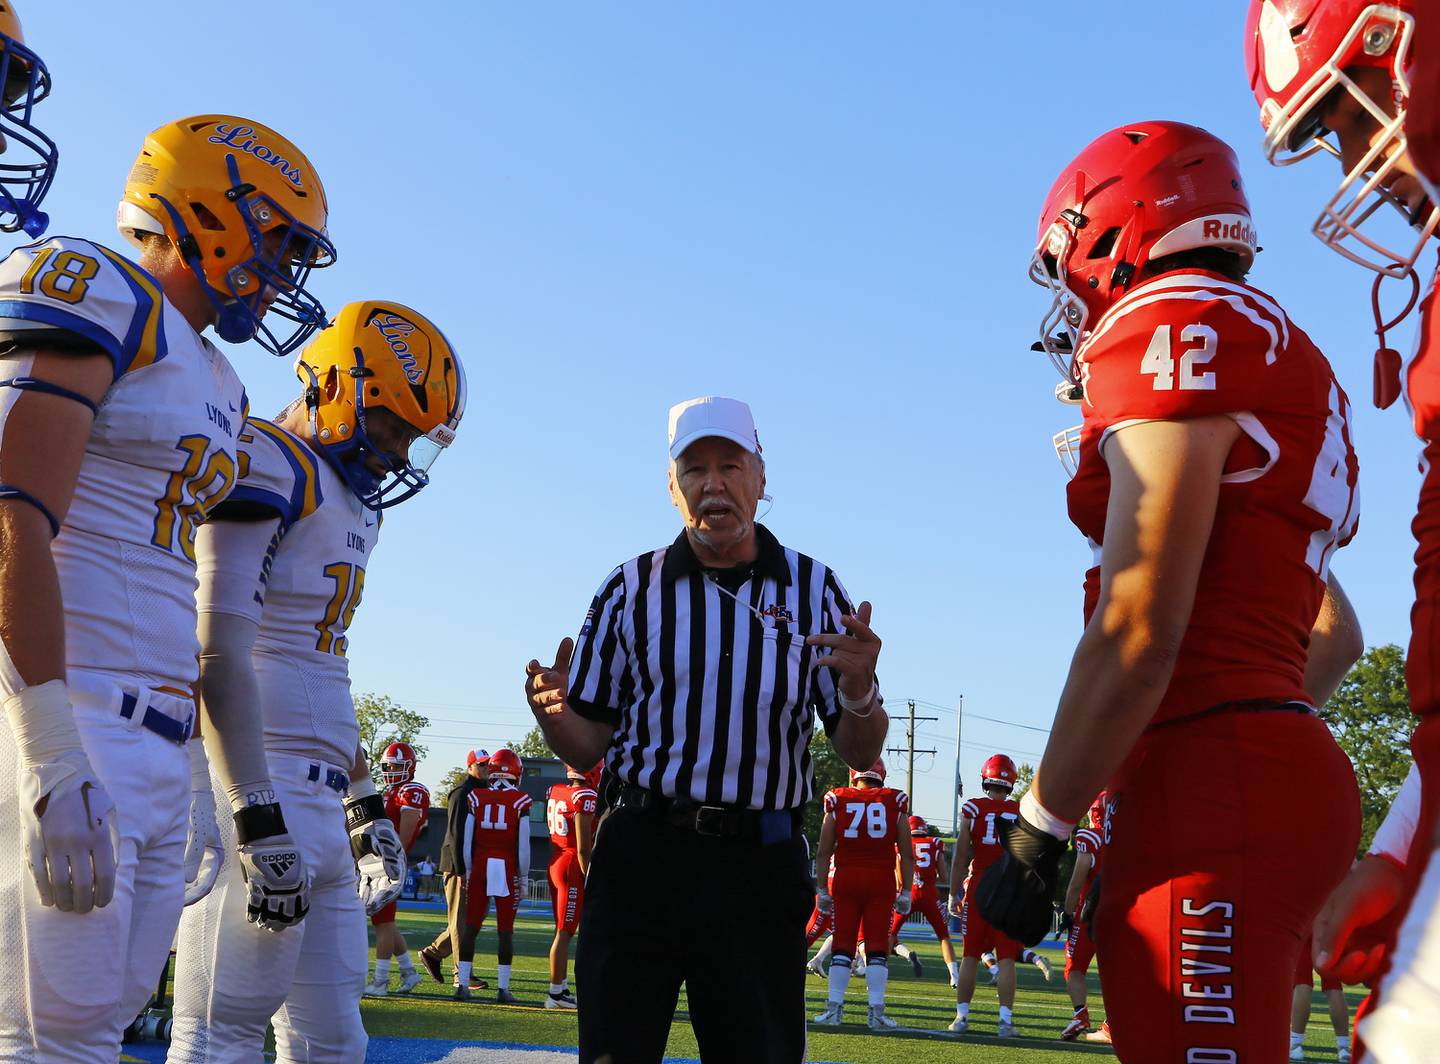 Referee Marty Munns gives the pre-game talk before the boys varsity football game between Hinsdale Central and Lyons Township on Friday, Sept. 9, 2022 in Western Springs, IL.